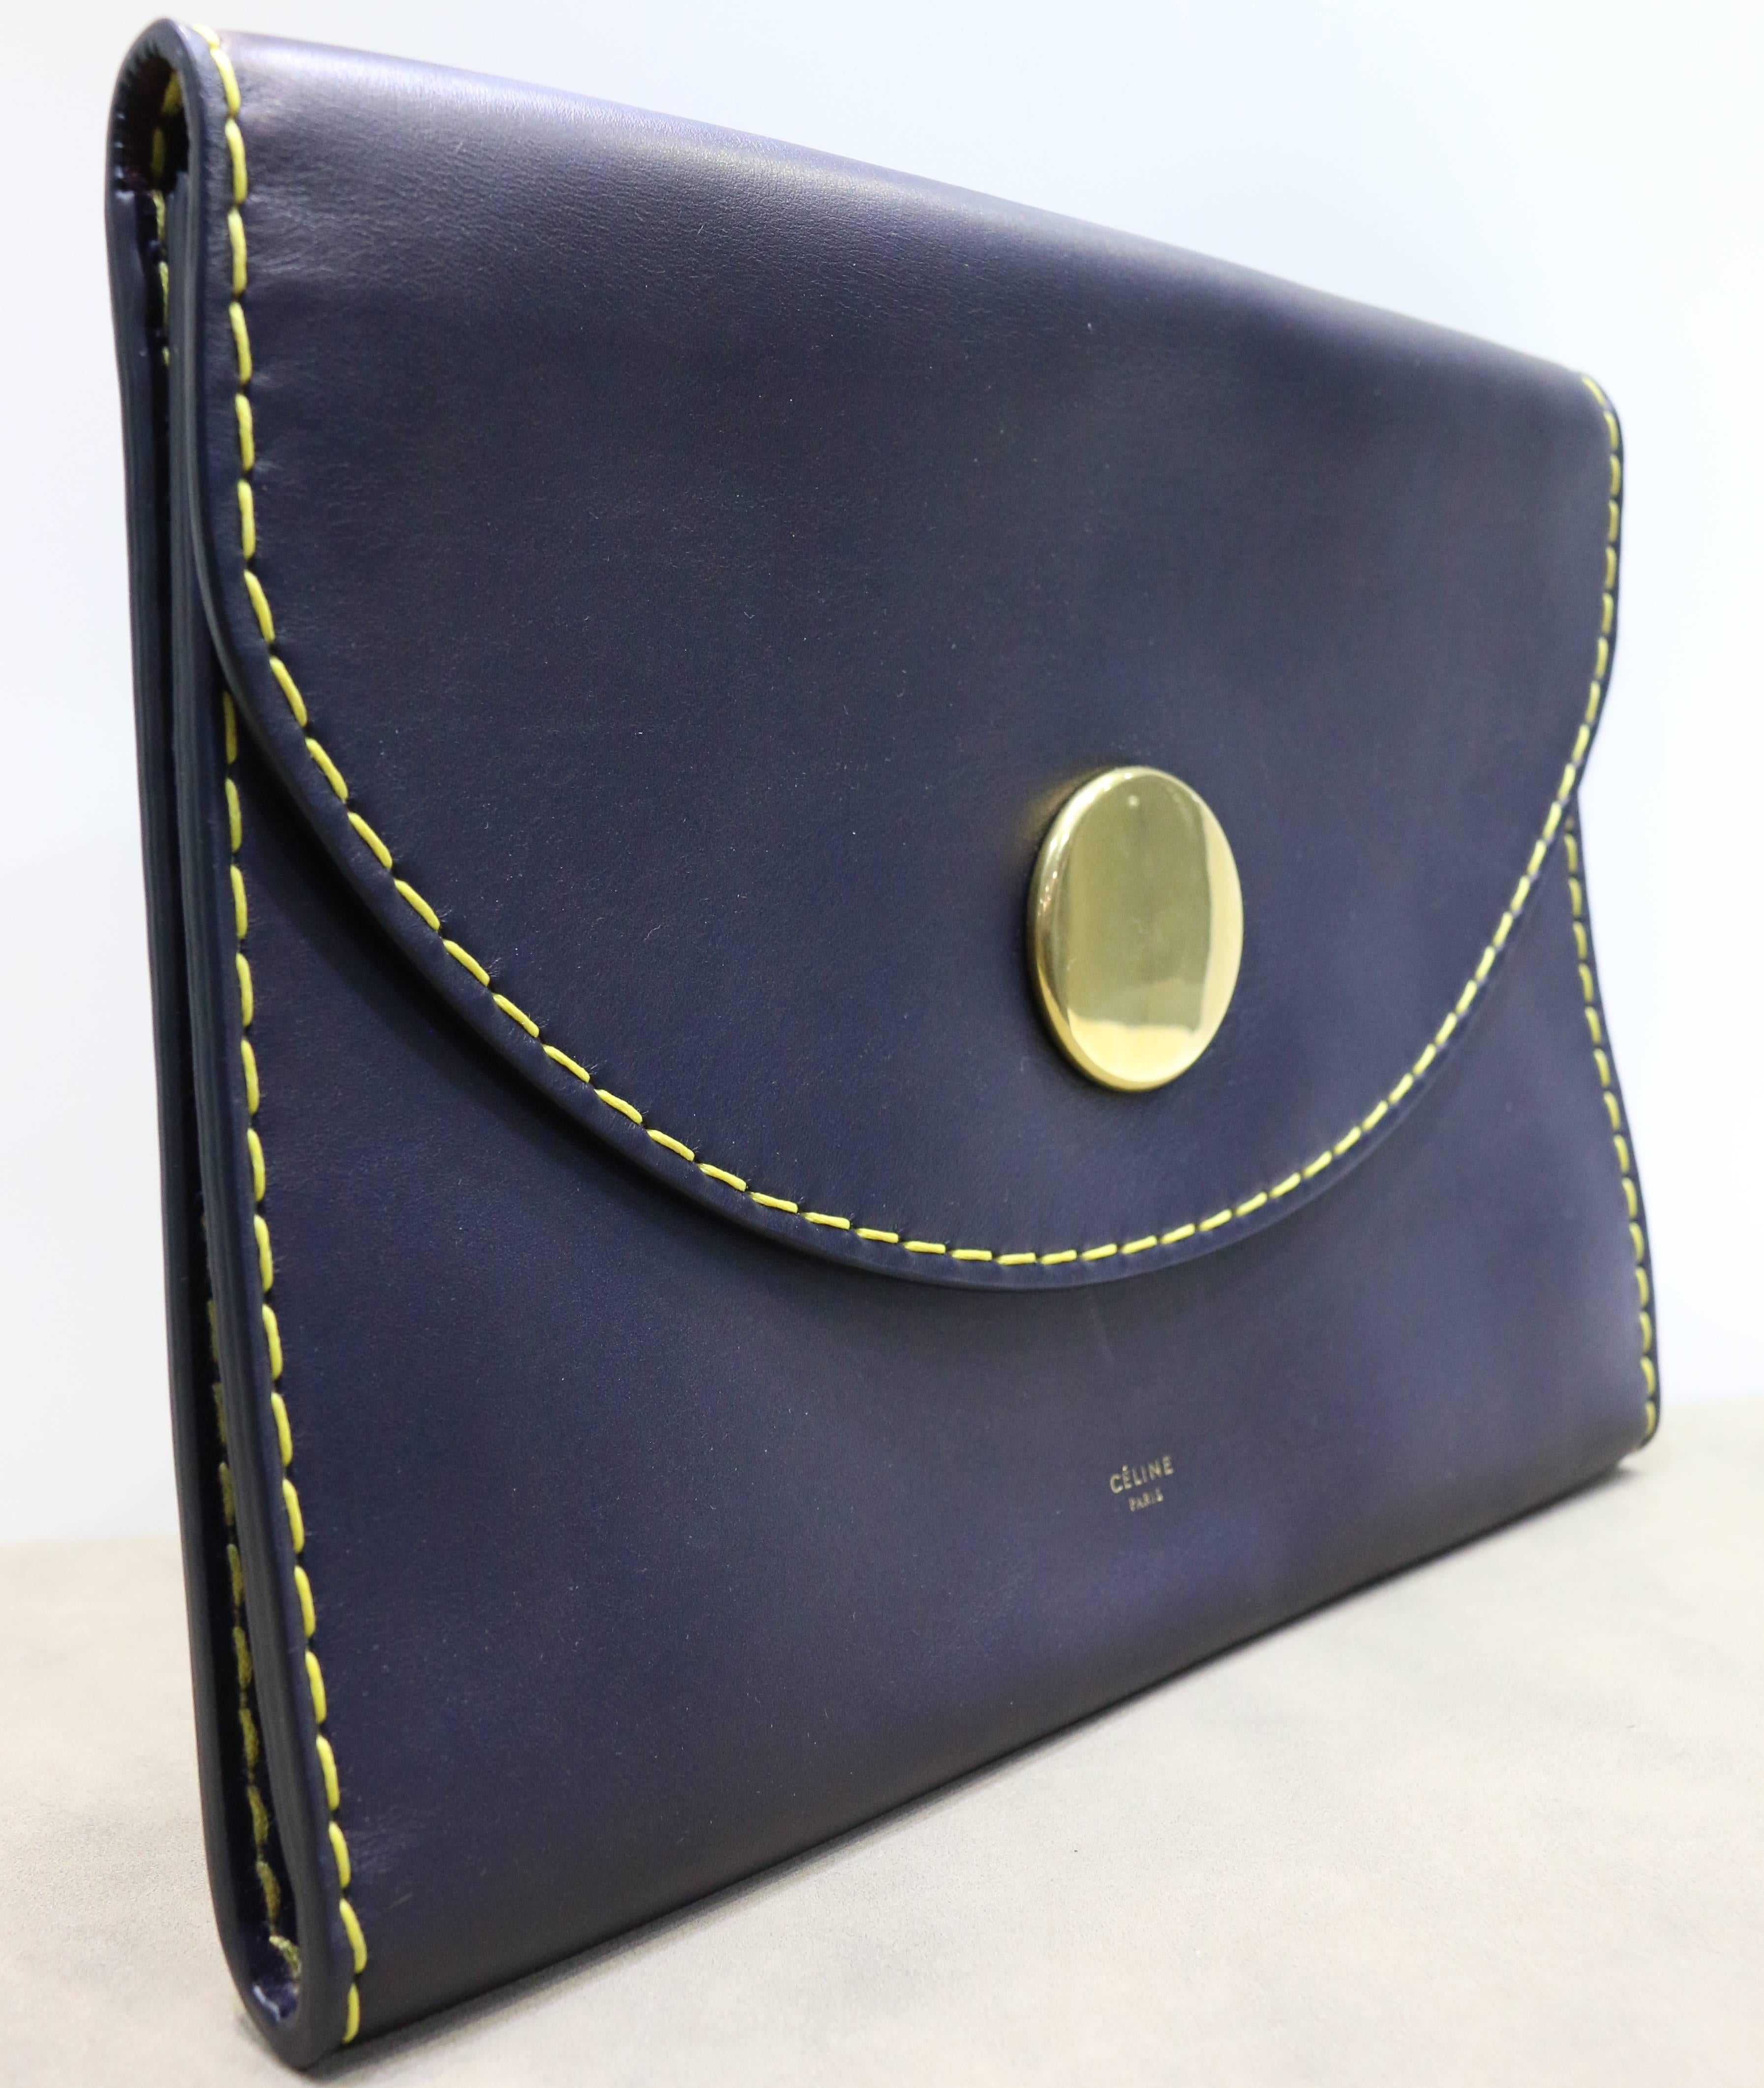 - Celine navy with yellow stitched calfskin leather flap clutch with contrast big gold hardware button closure. This clutch is light and easy to carry around especially for party. Red leather interior is spacious and have two compartments. You can